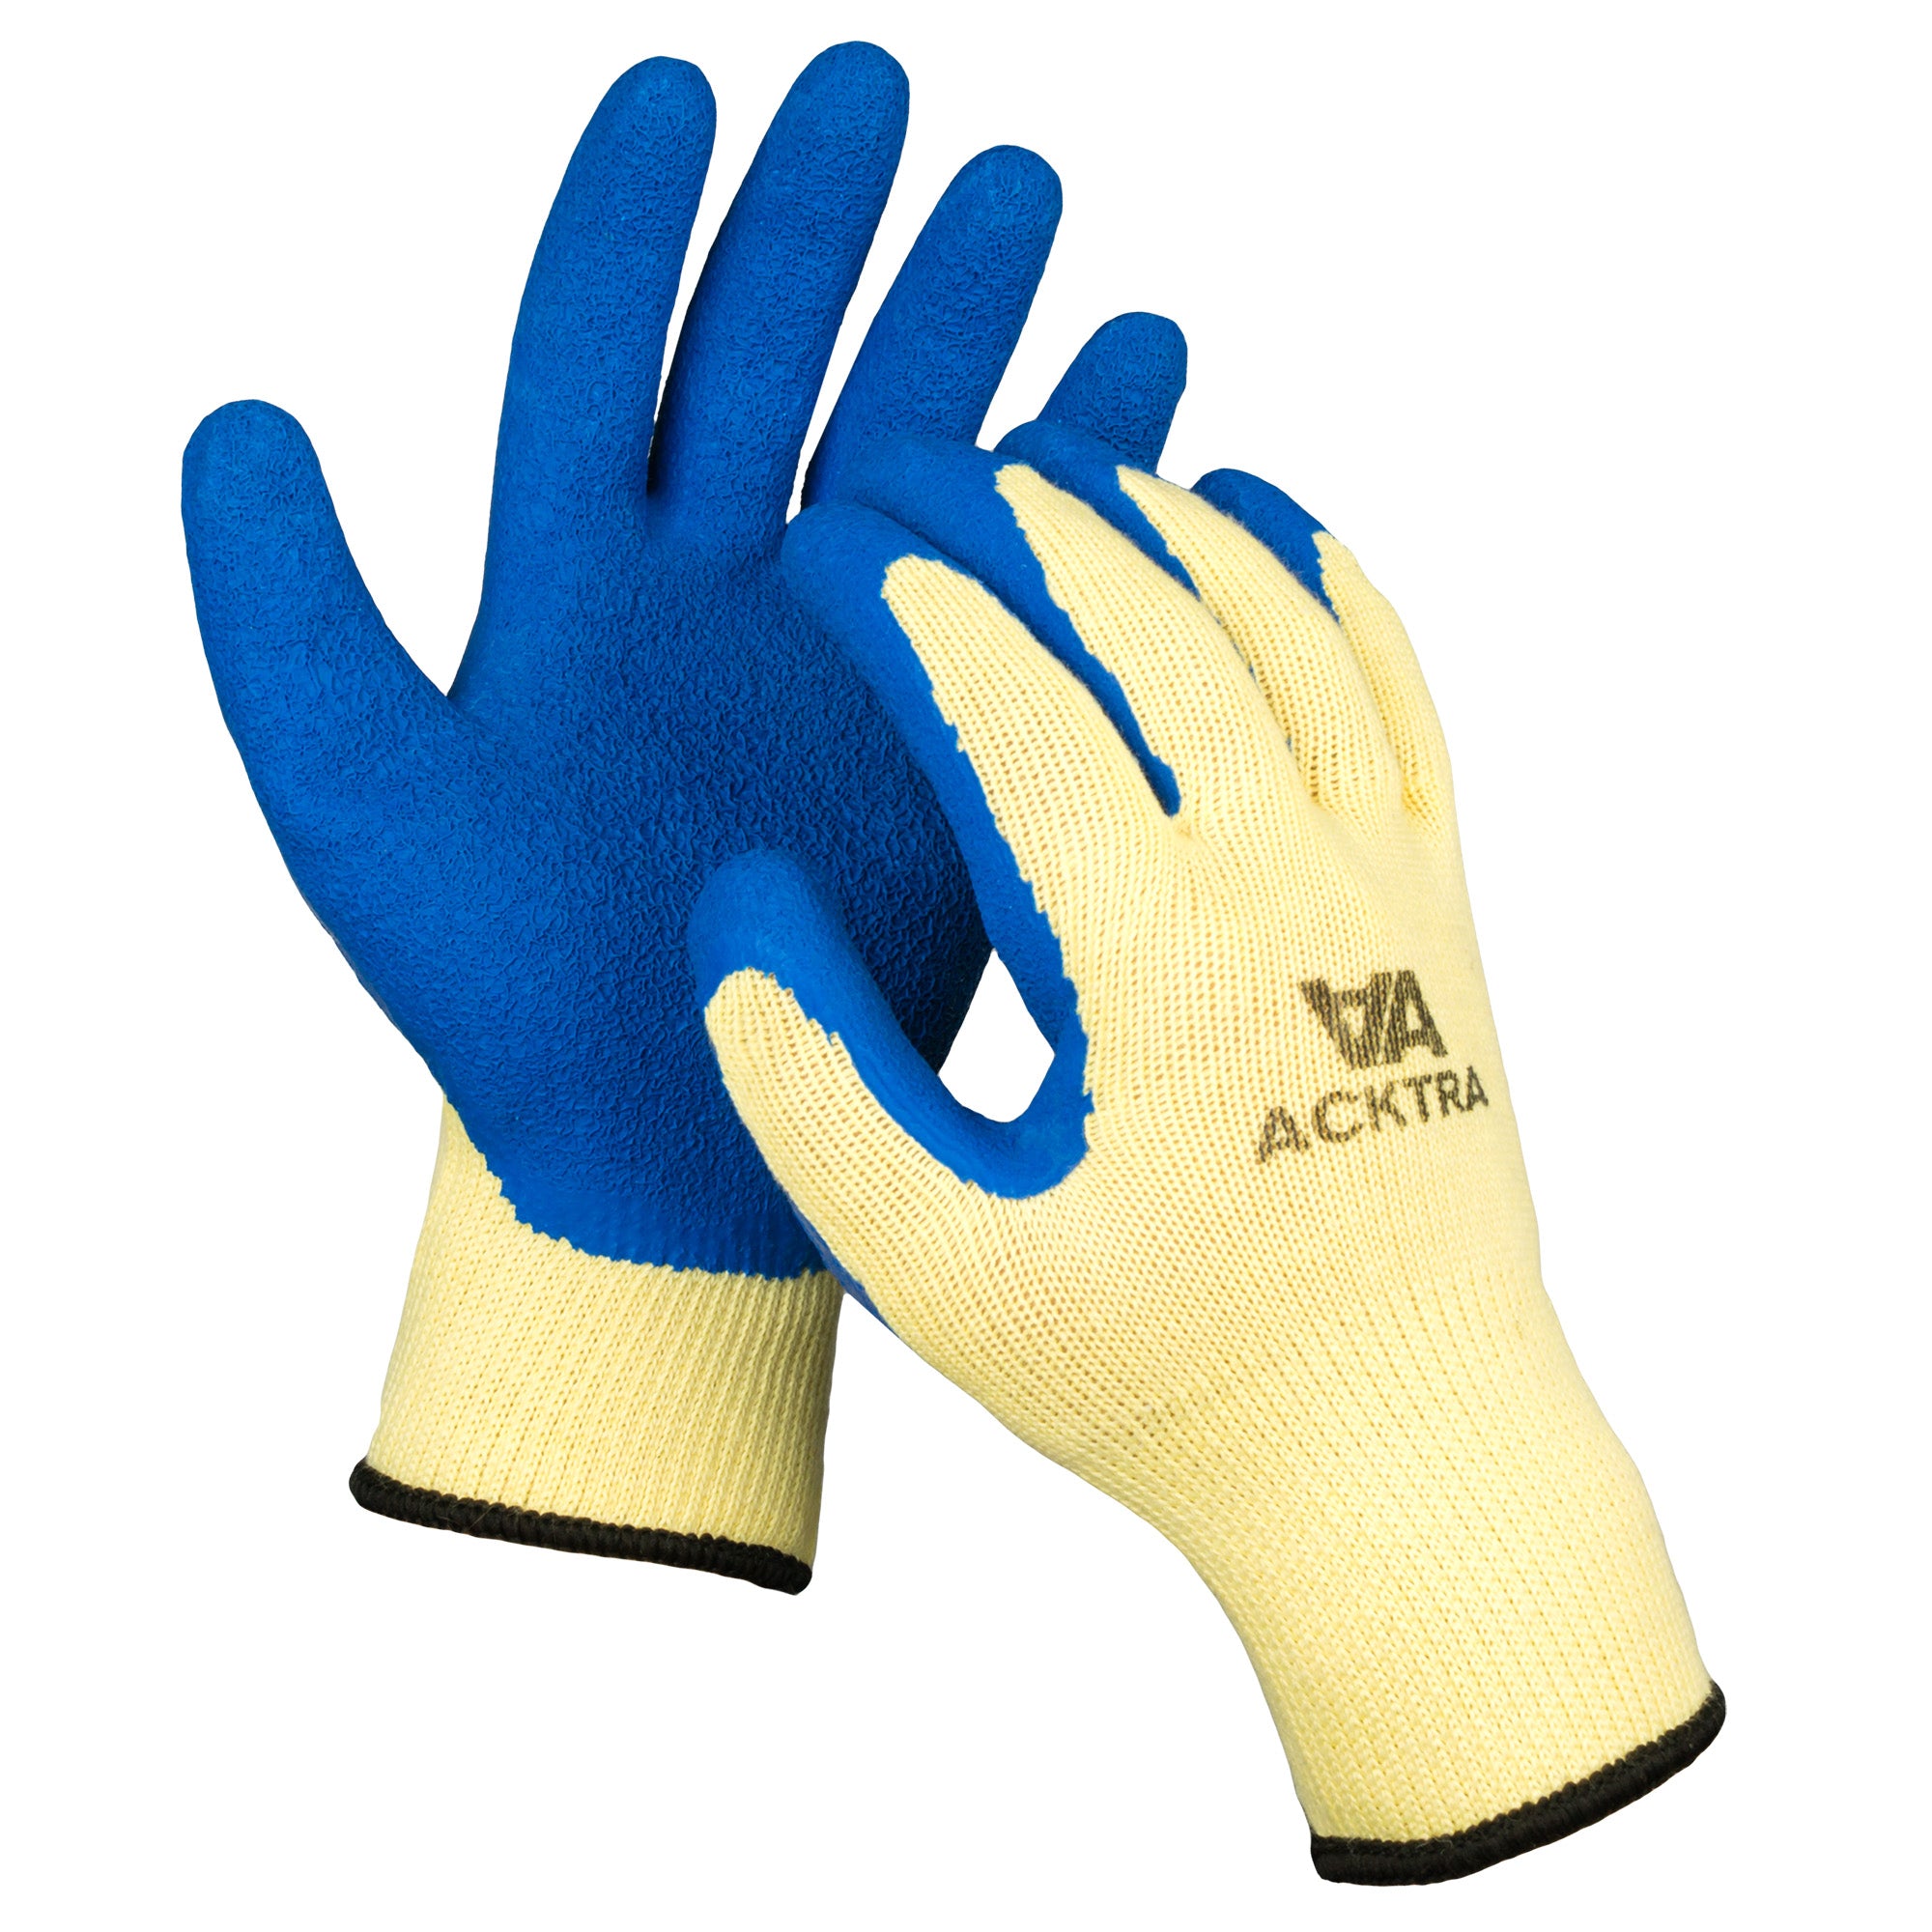 Latex Coated Grip Knit Work Gloves